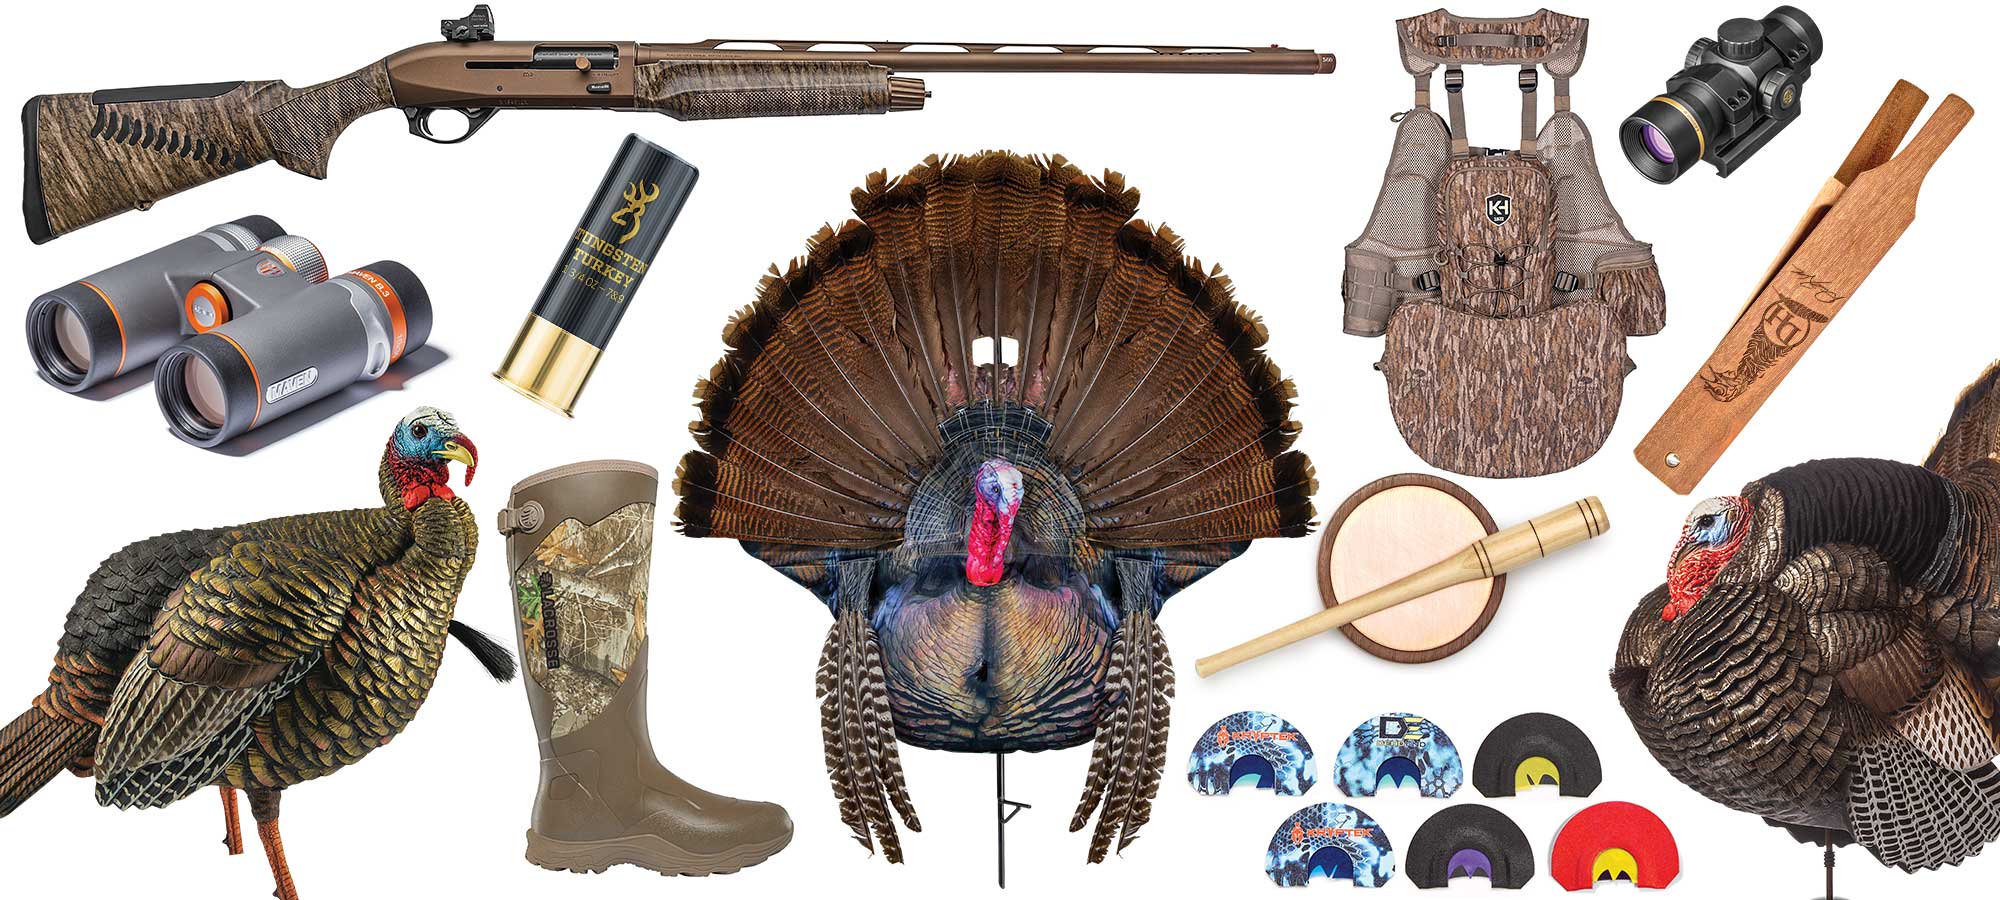 The Best New Turkey Hunting Gear Guide for 2019 Field & Stream